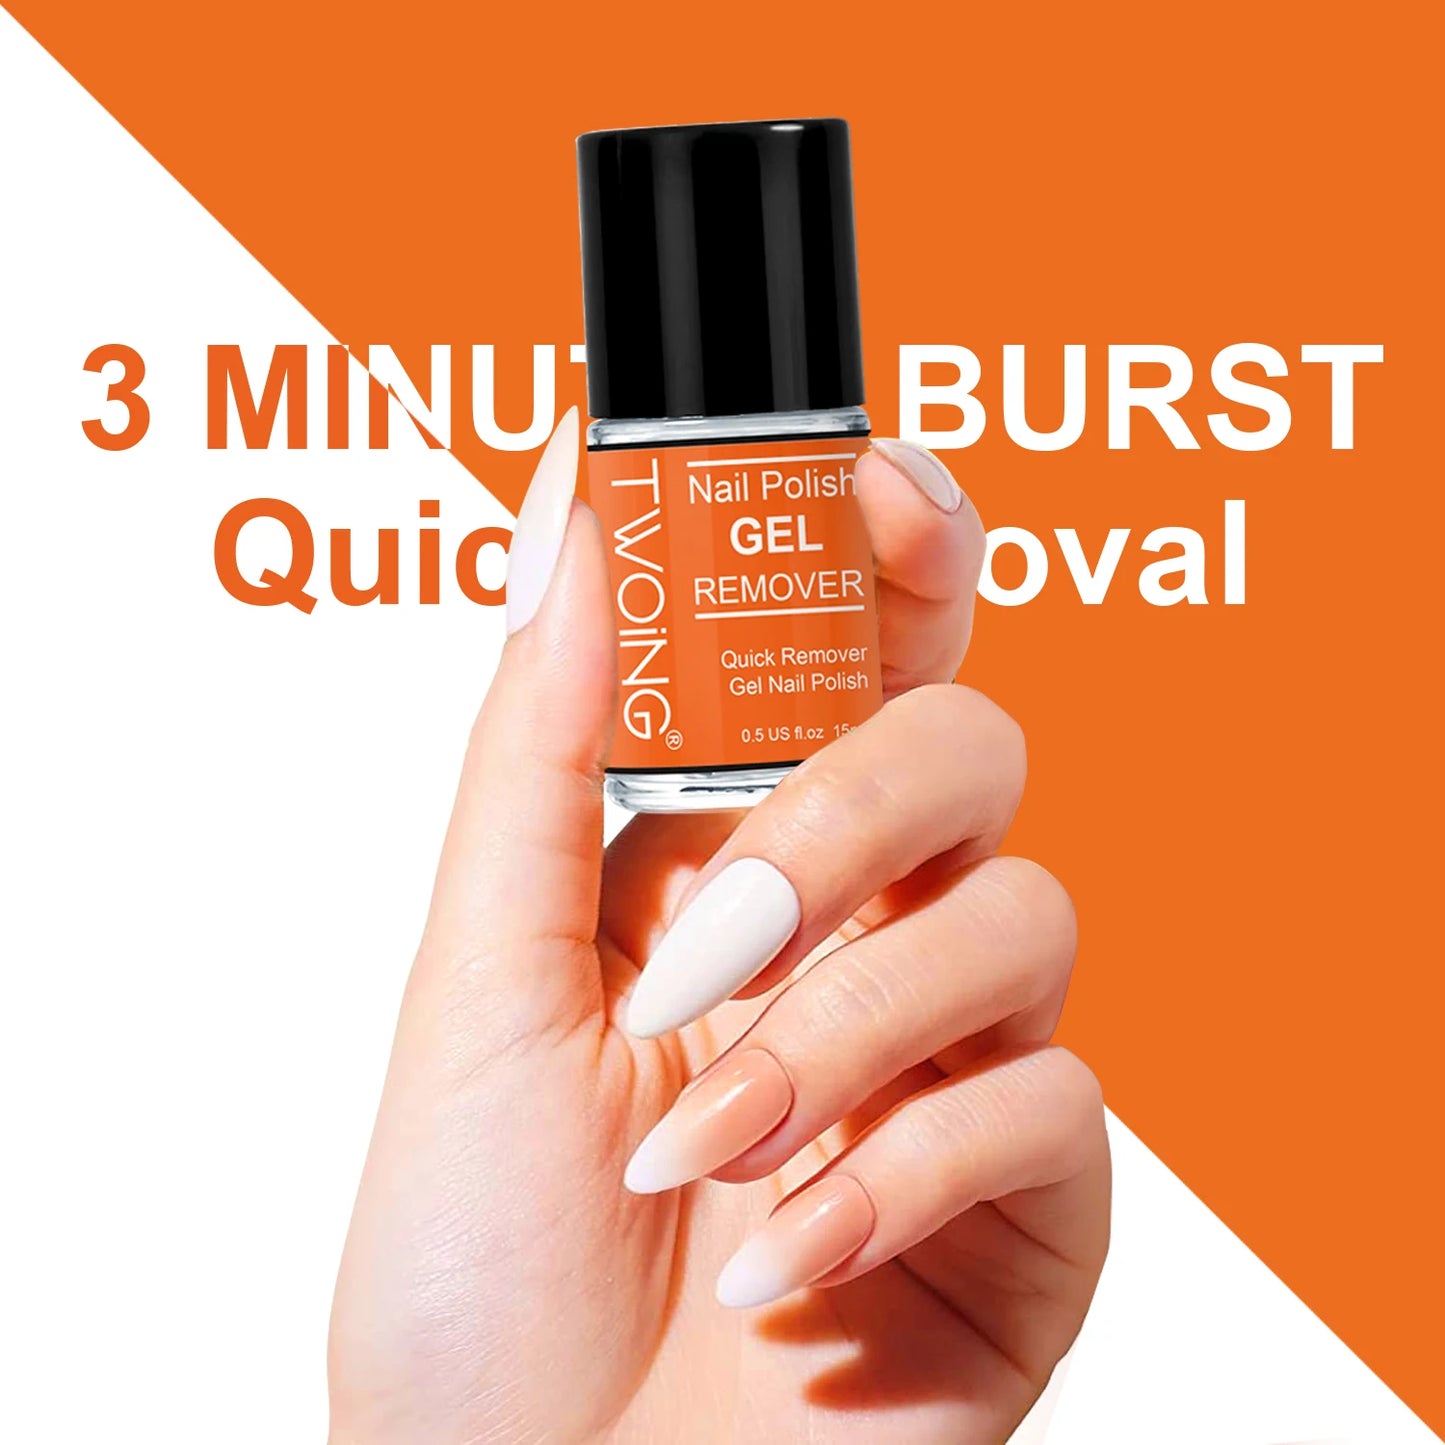 Quick UV Gel Nail Polish Removal in 2-5 Minutes